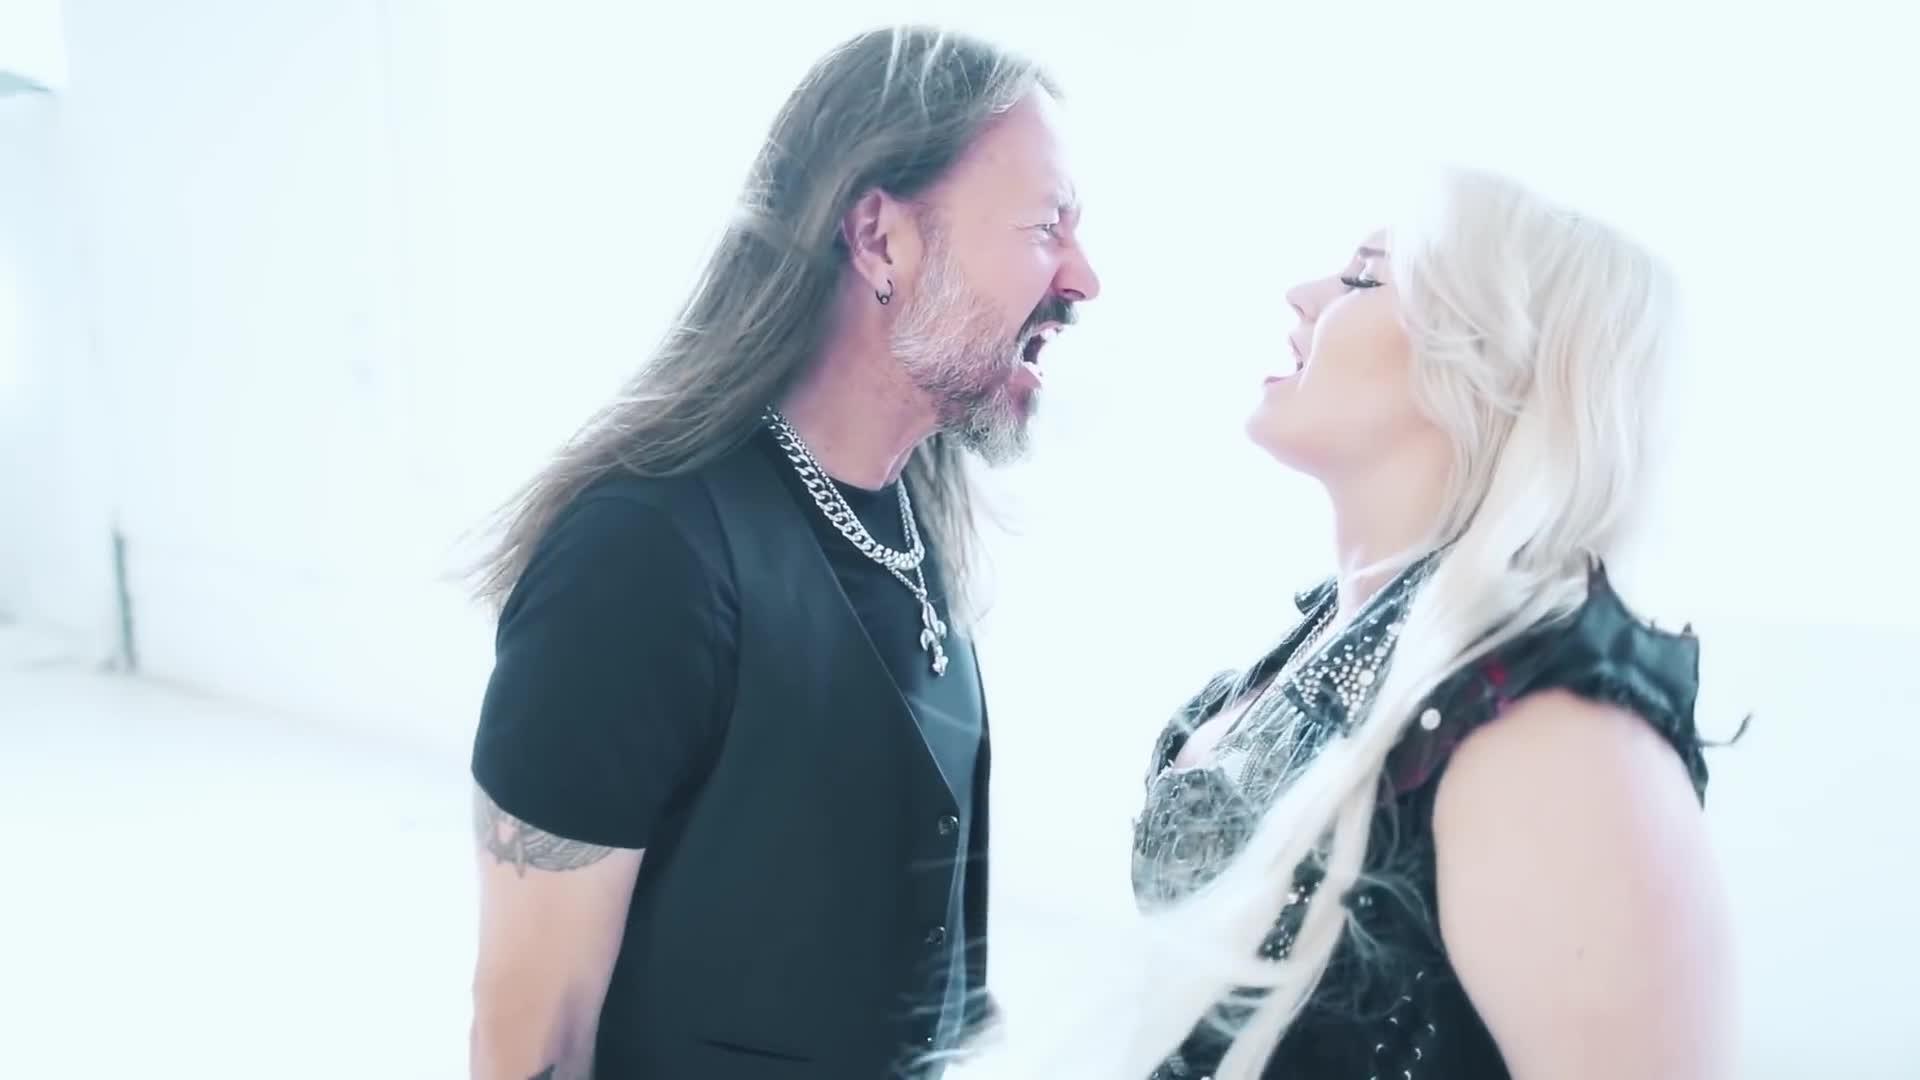 Hammerfall Ft. Noora Louhimo - Second To One